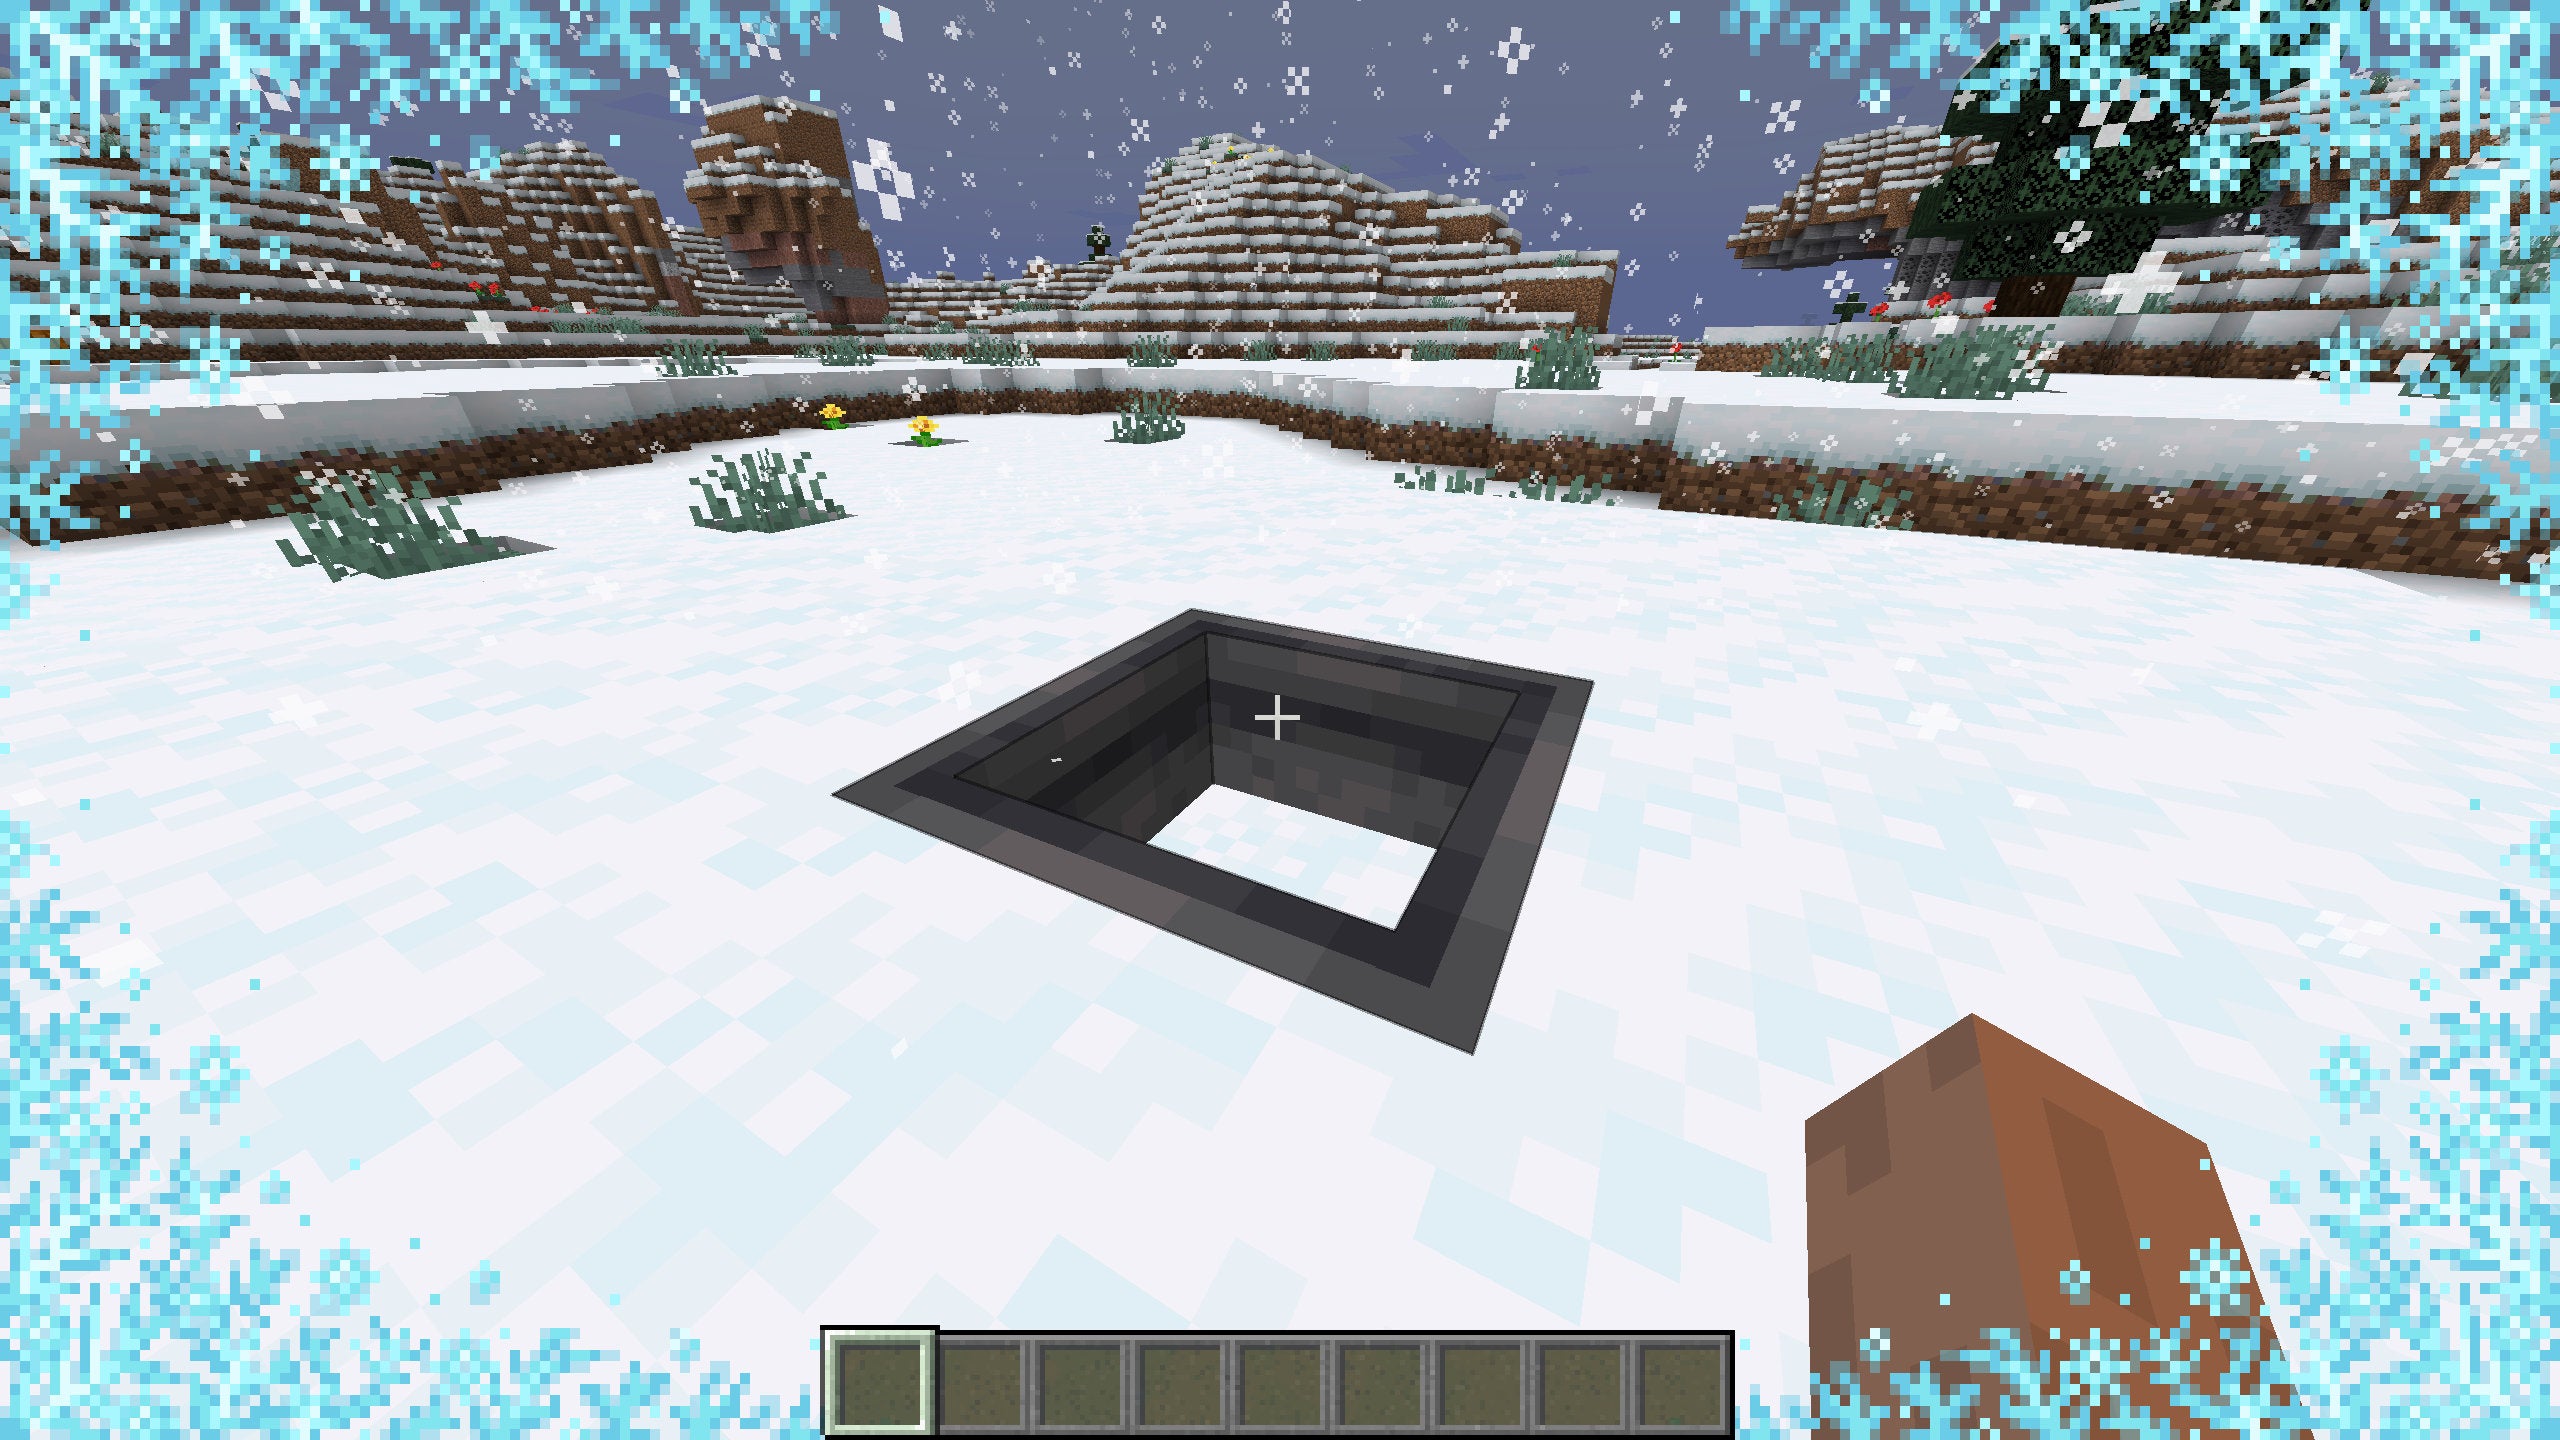 A Minecraft screenshot of the player freezing inside Powder Snow in a snowy biome, with a cauldron slowly collecting Powder Snow in front of them.